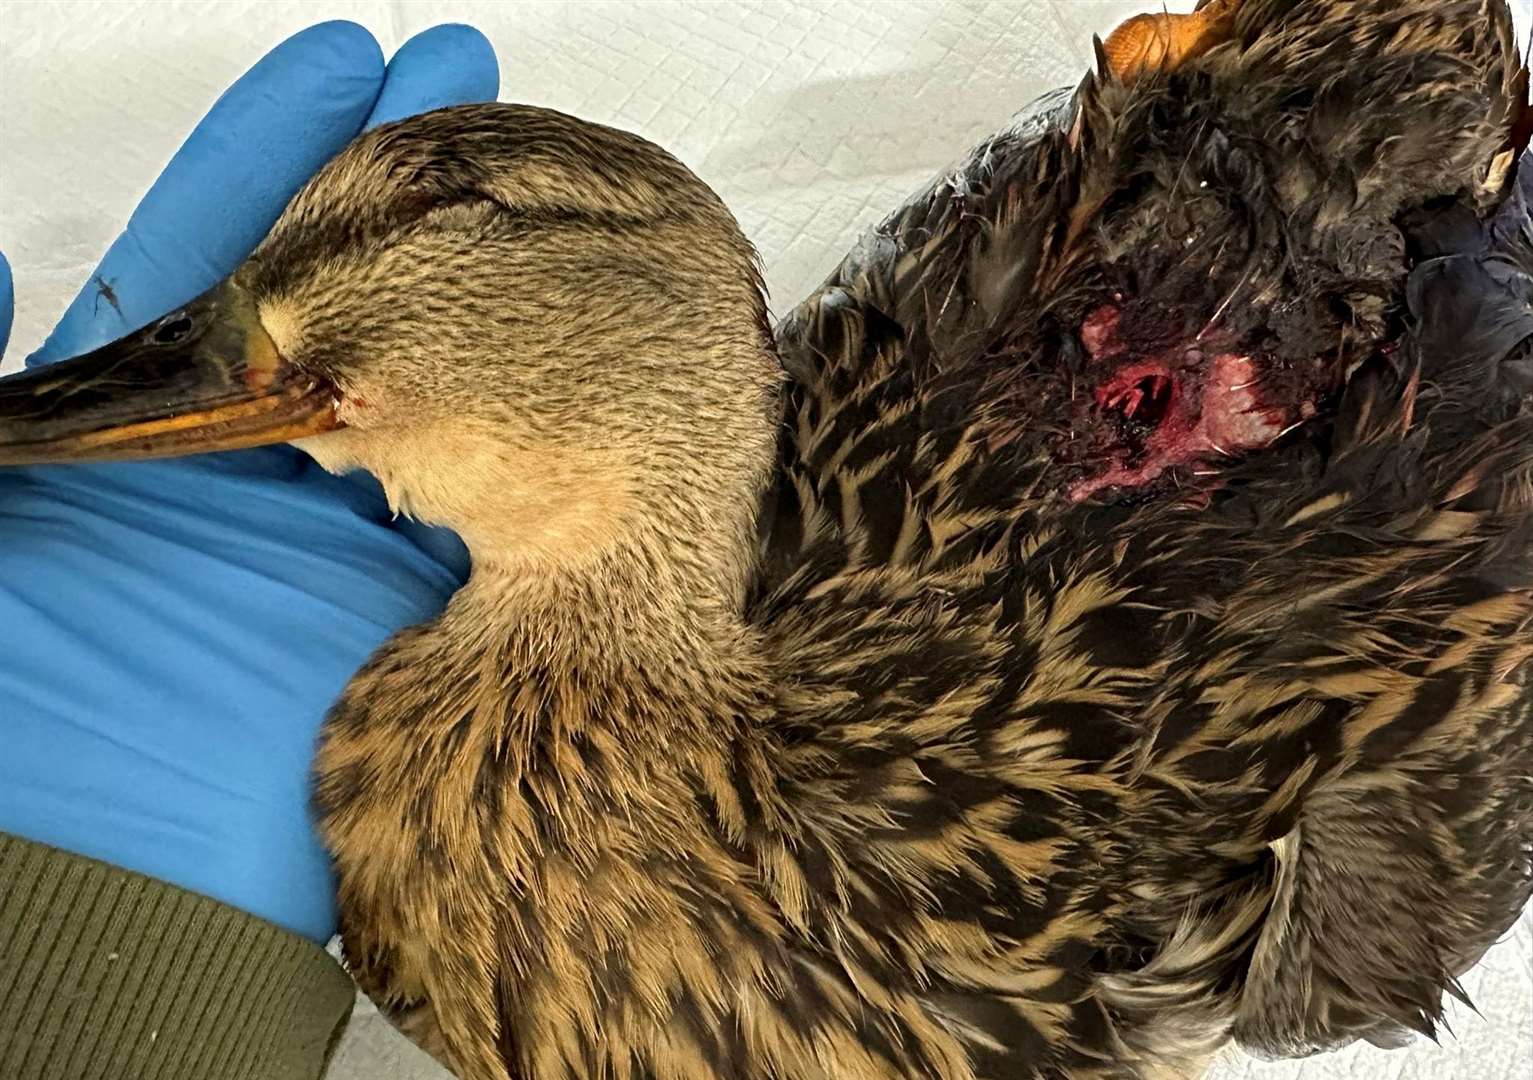 One of the injuries the duck suffered in the catapult attack. Picture: Columbines Wildlife Care